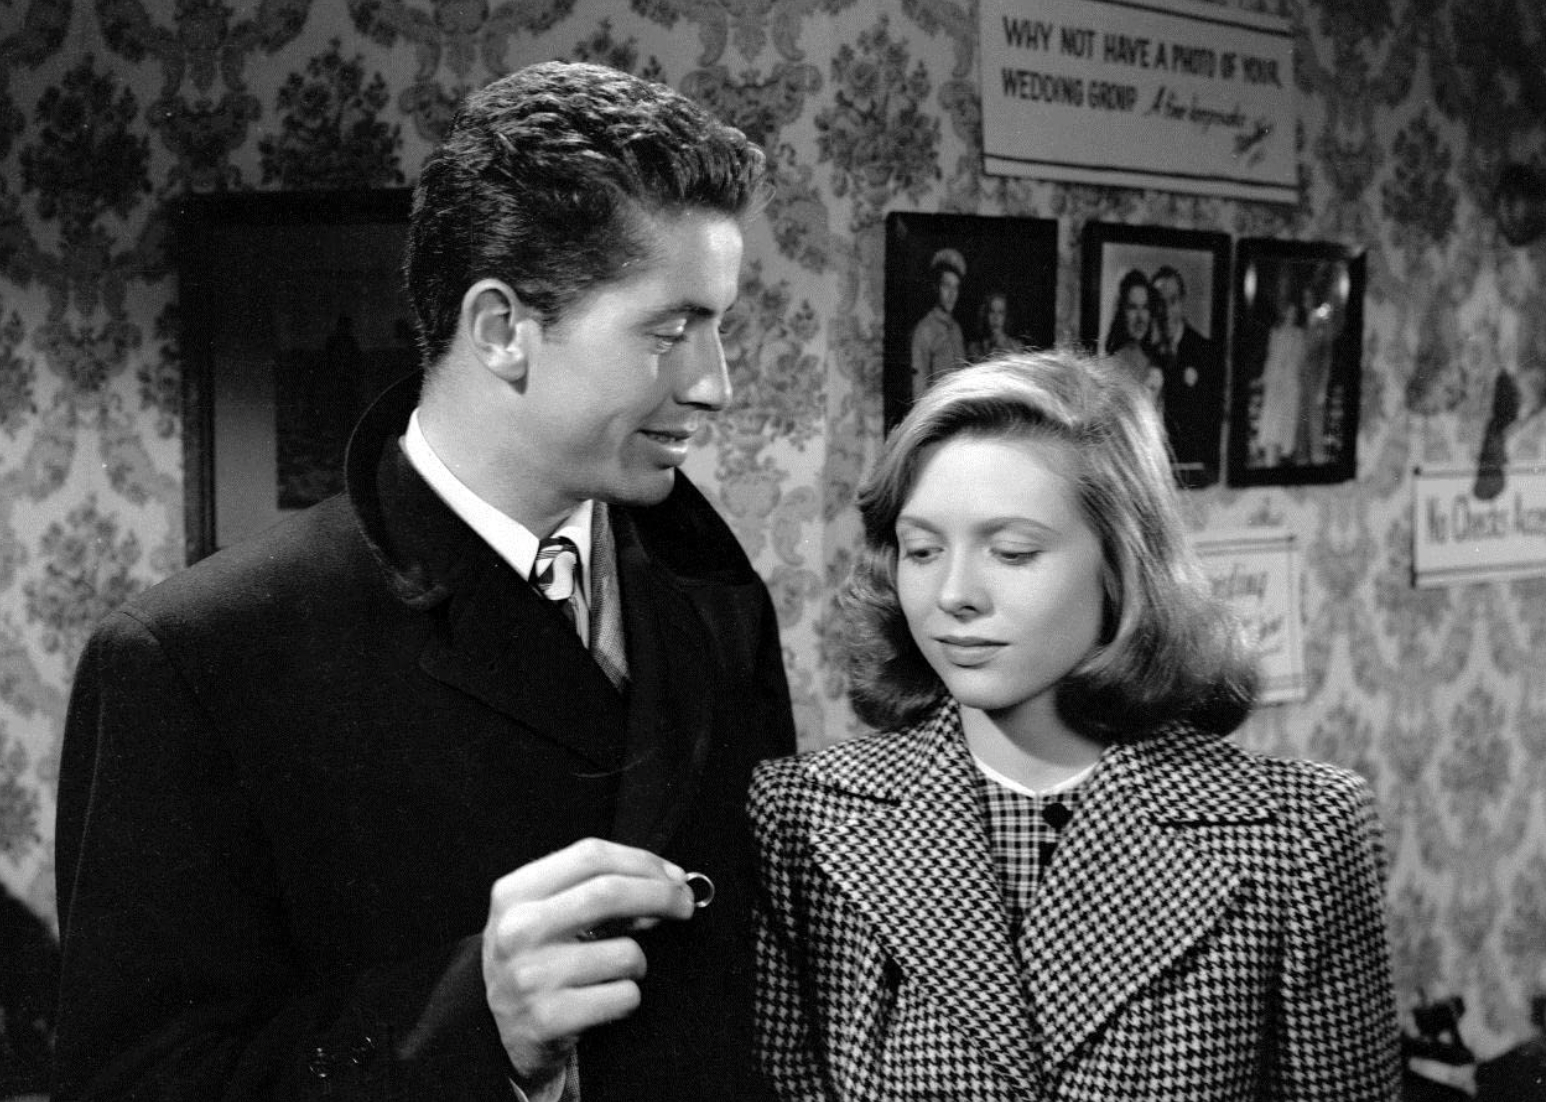 Farley Granger and Cathy O'Donnell in "They Live by Night"